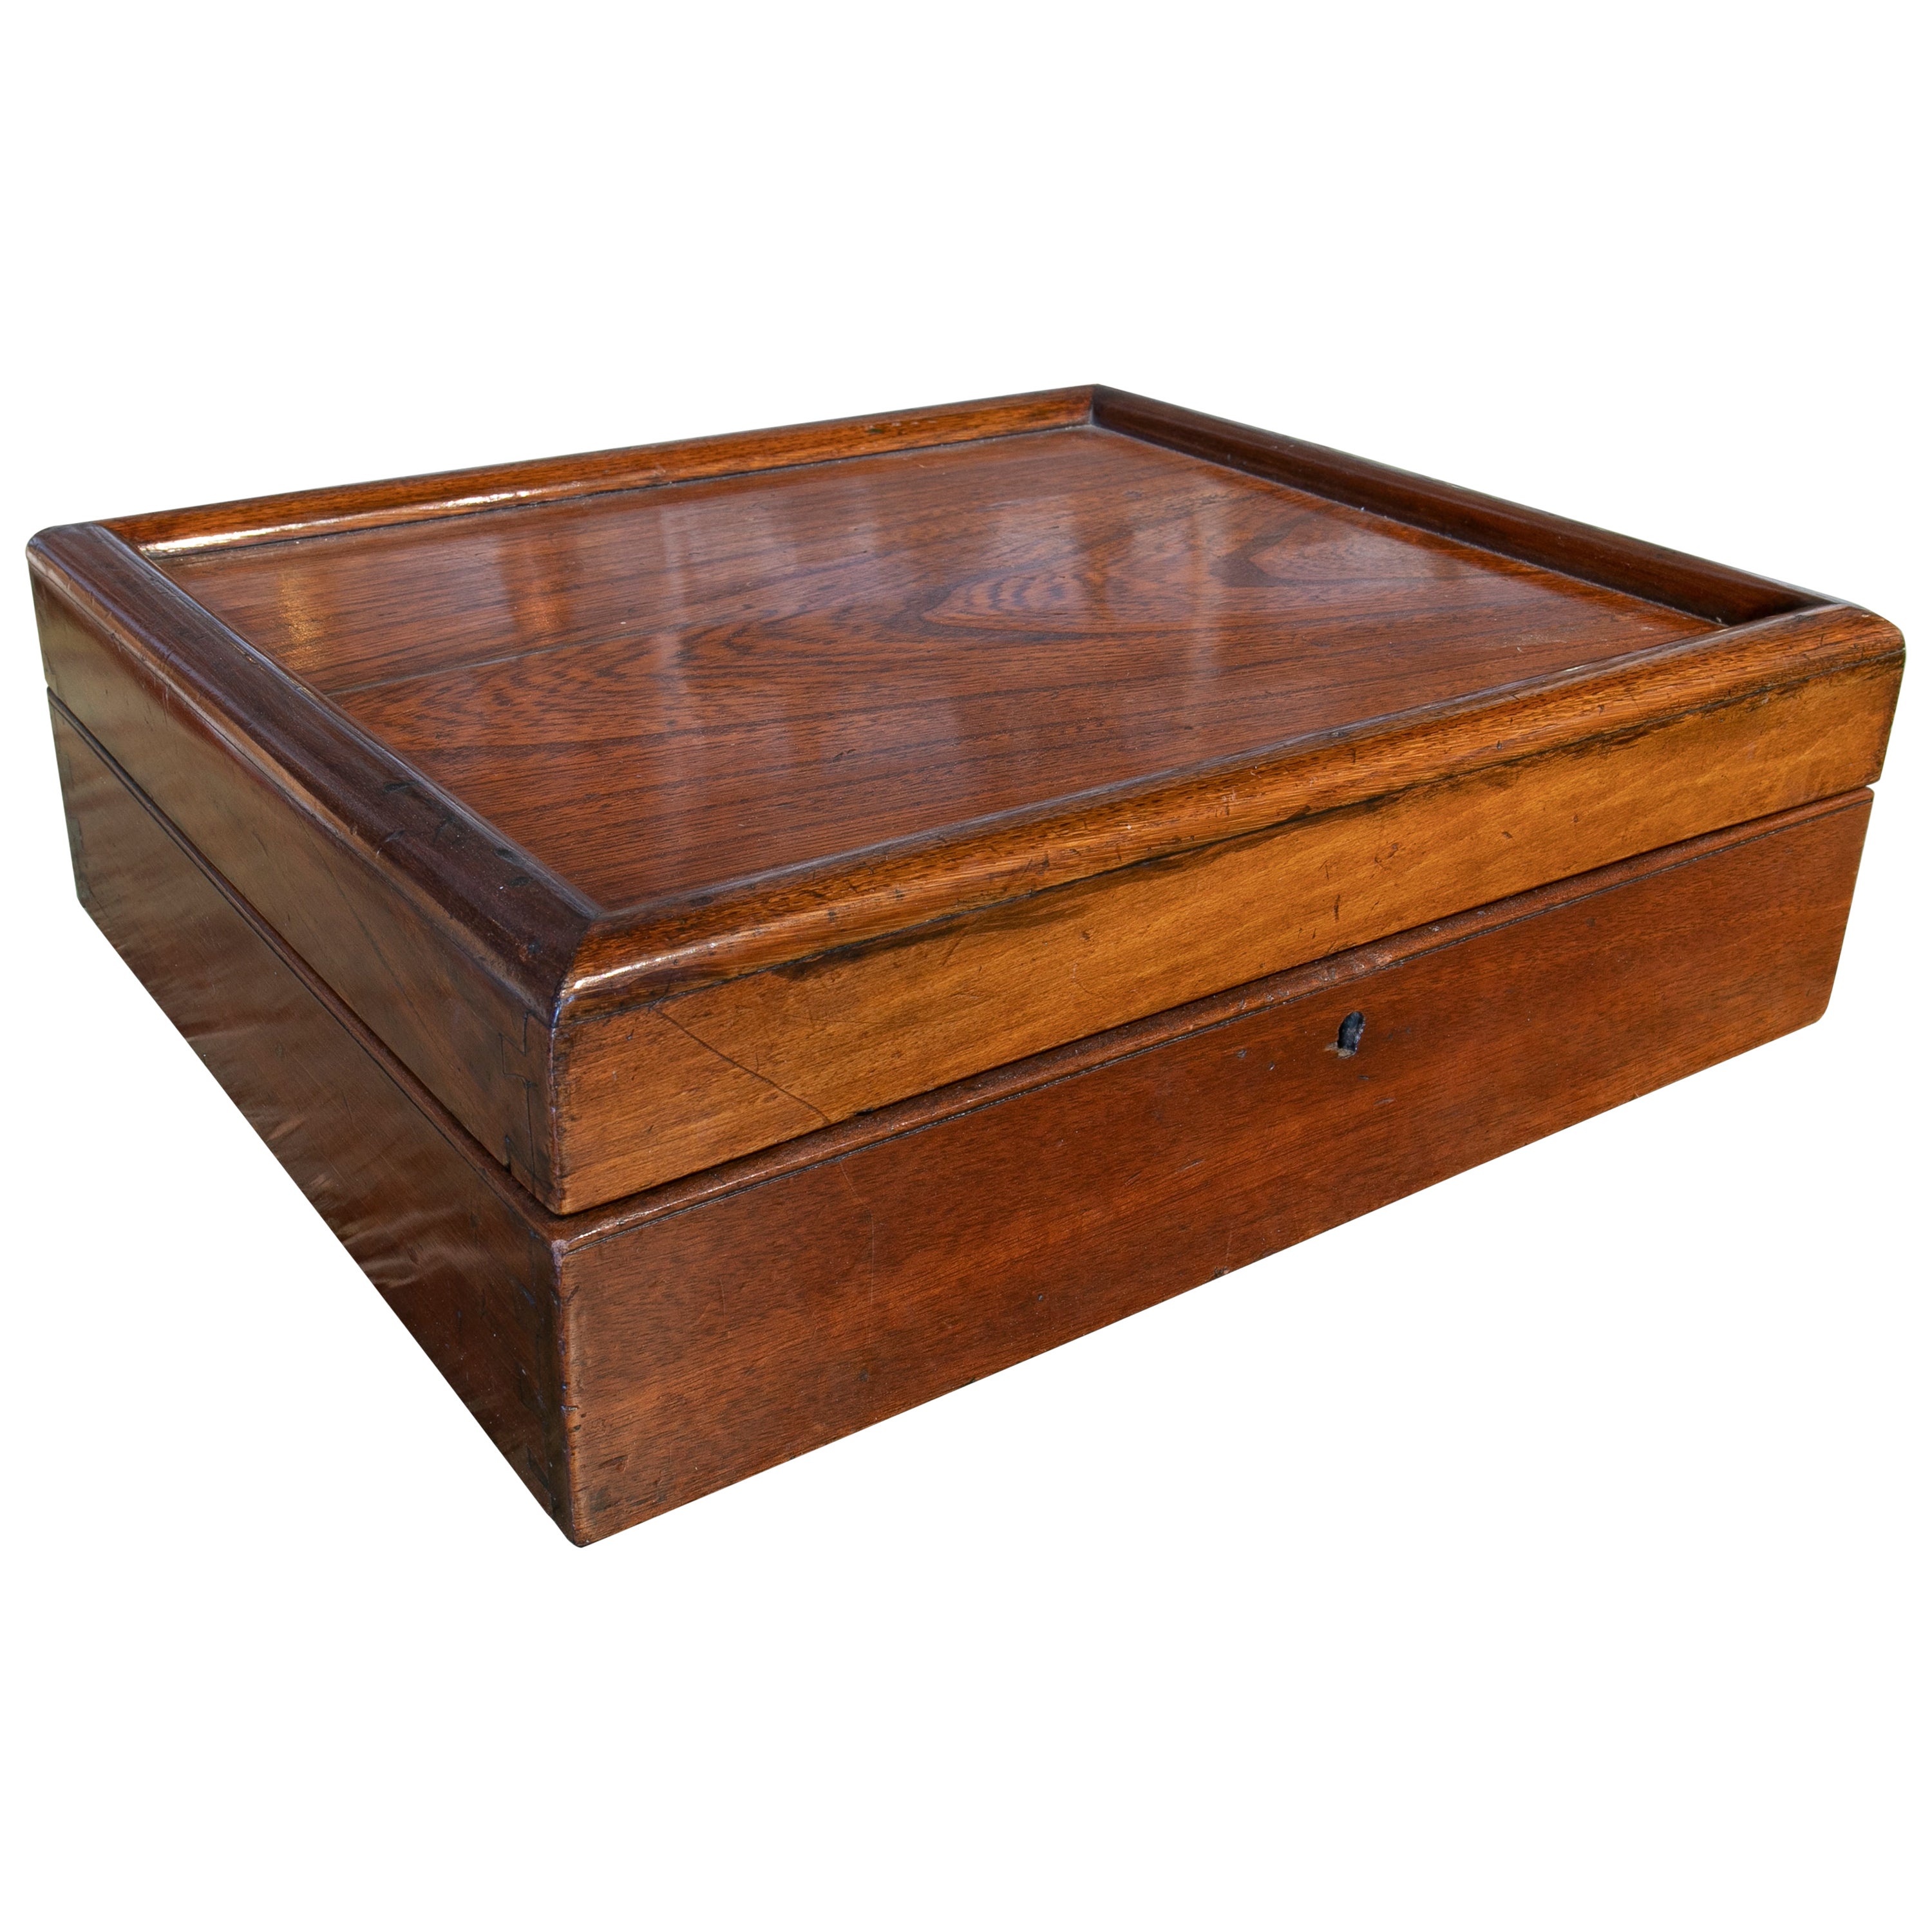 English Mahogany Wooden Box with Lid and Lock For Sale